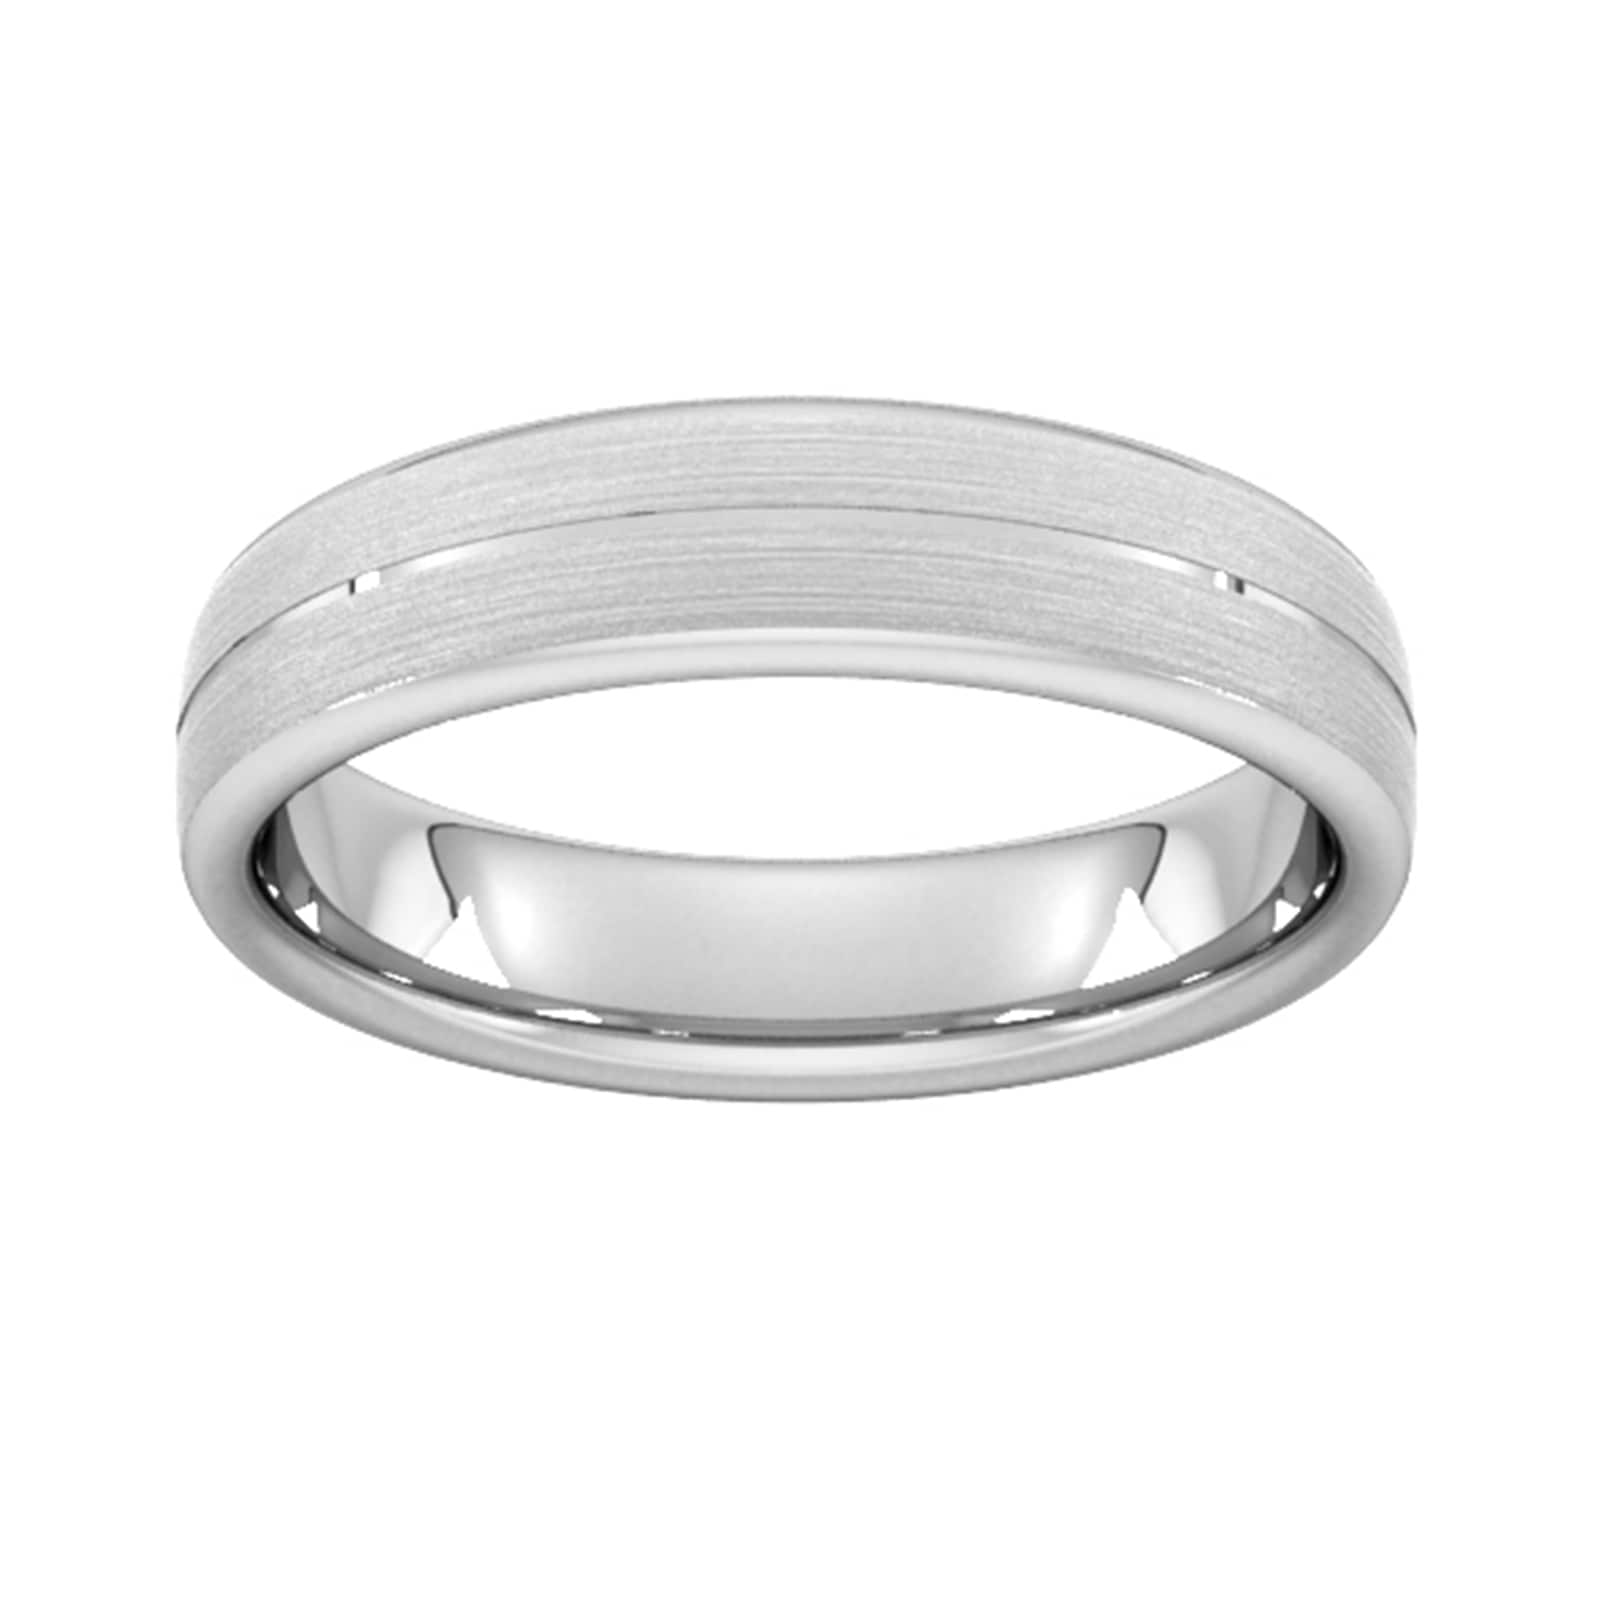 5mm D Shape Standard Centre Groove With Chamfered Edge Wedding Ring In 9 Carat White Gold - Ring Size I